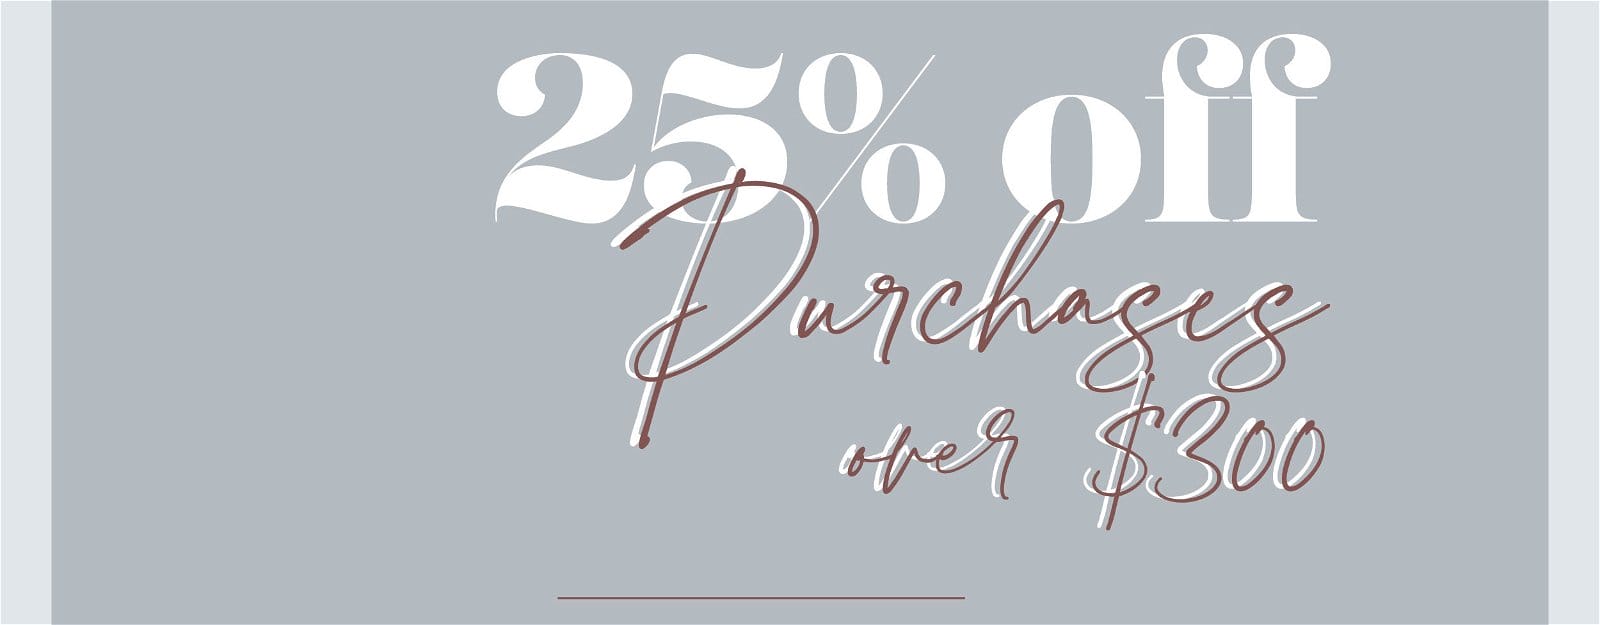 25% off Purchases over \\$300